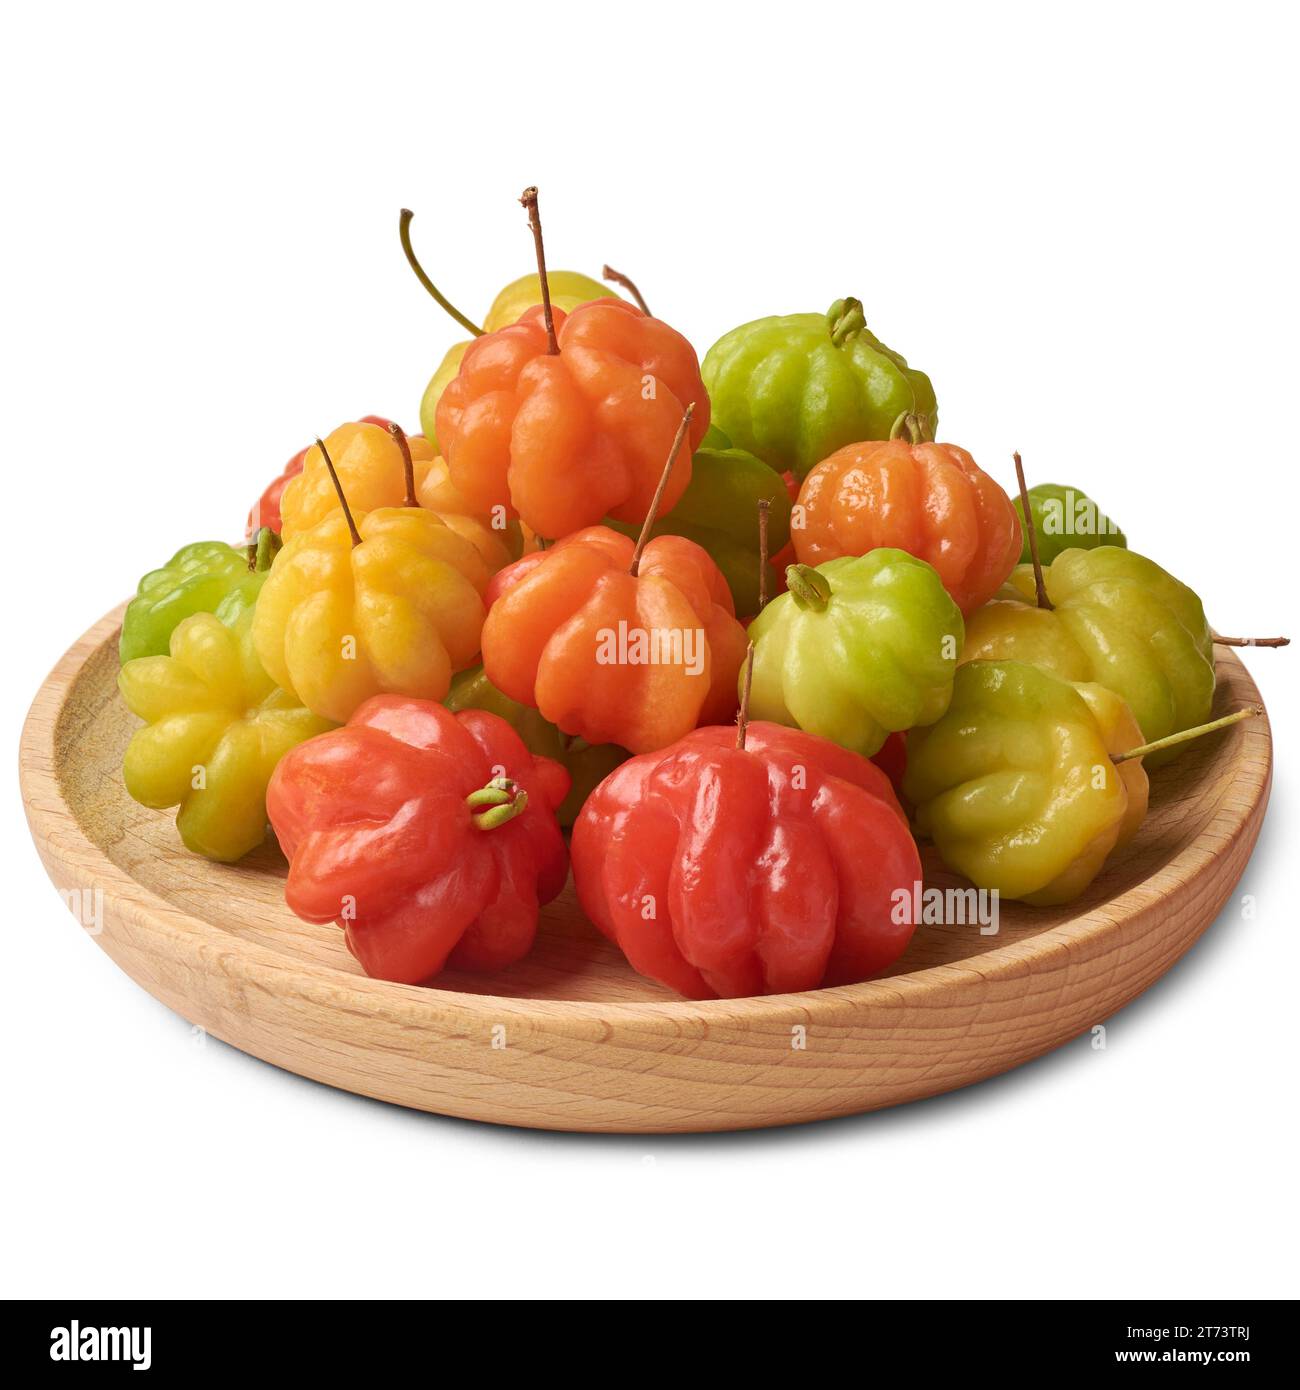 close-up of surinam cherries, eugenia uniflora, aka pitanga, brazilian or cayenne cherry, vibrant colorful fruits on wooden plate, isolated on white Stock Photo